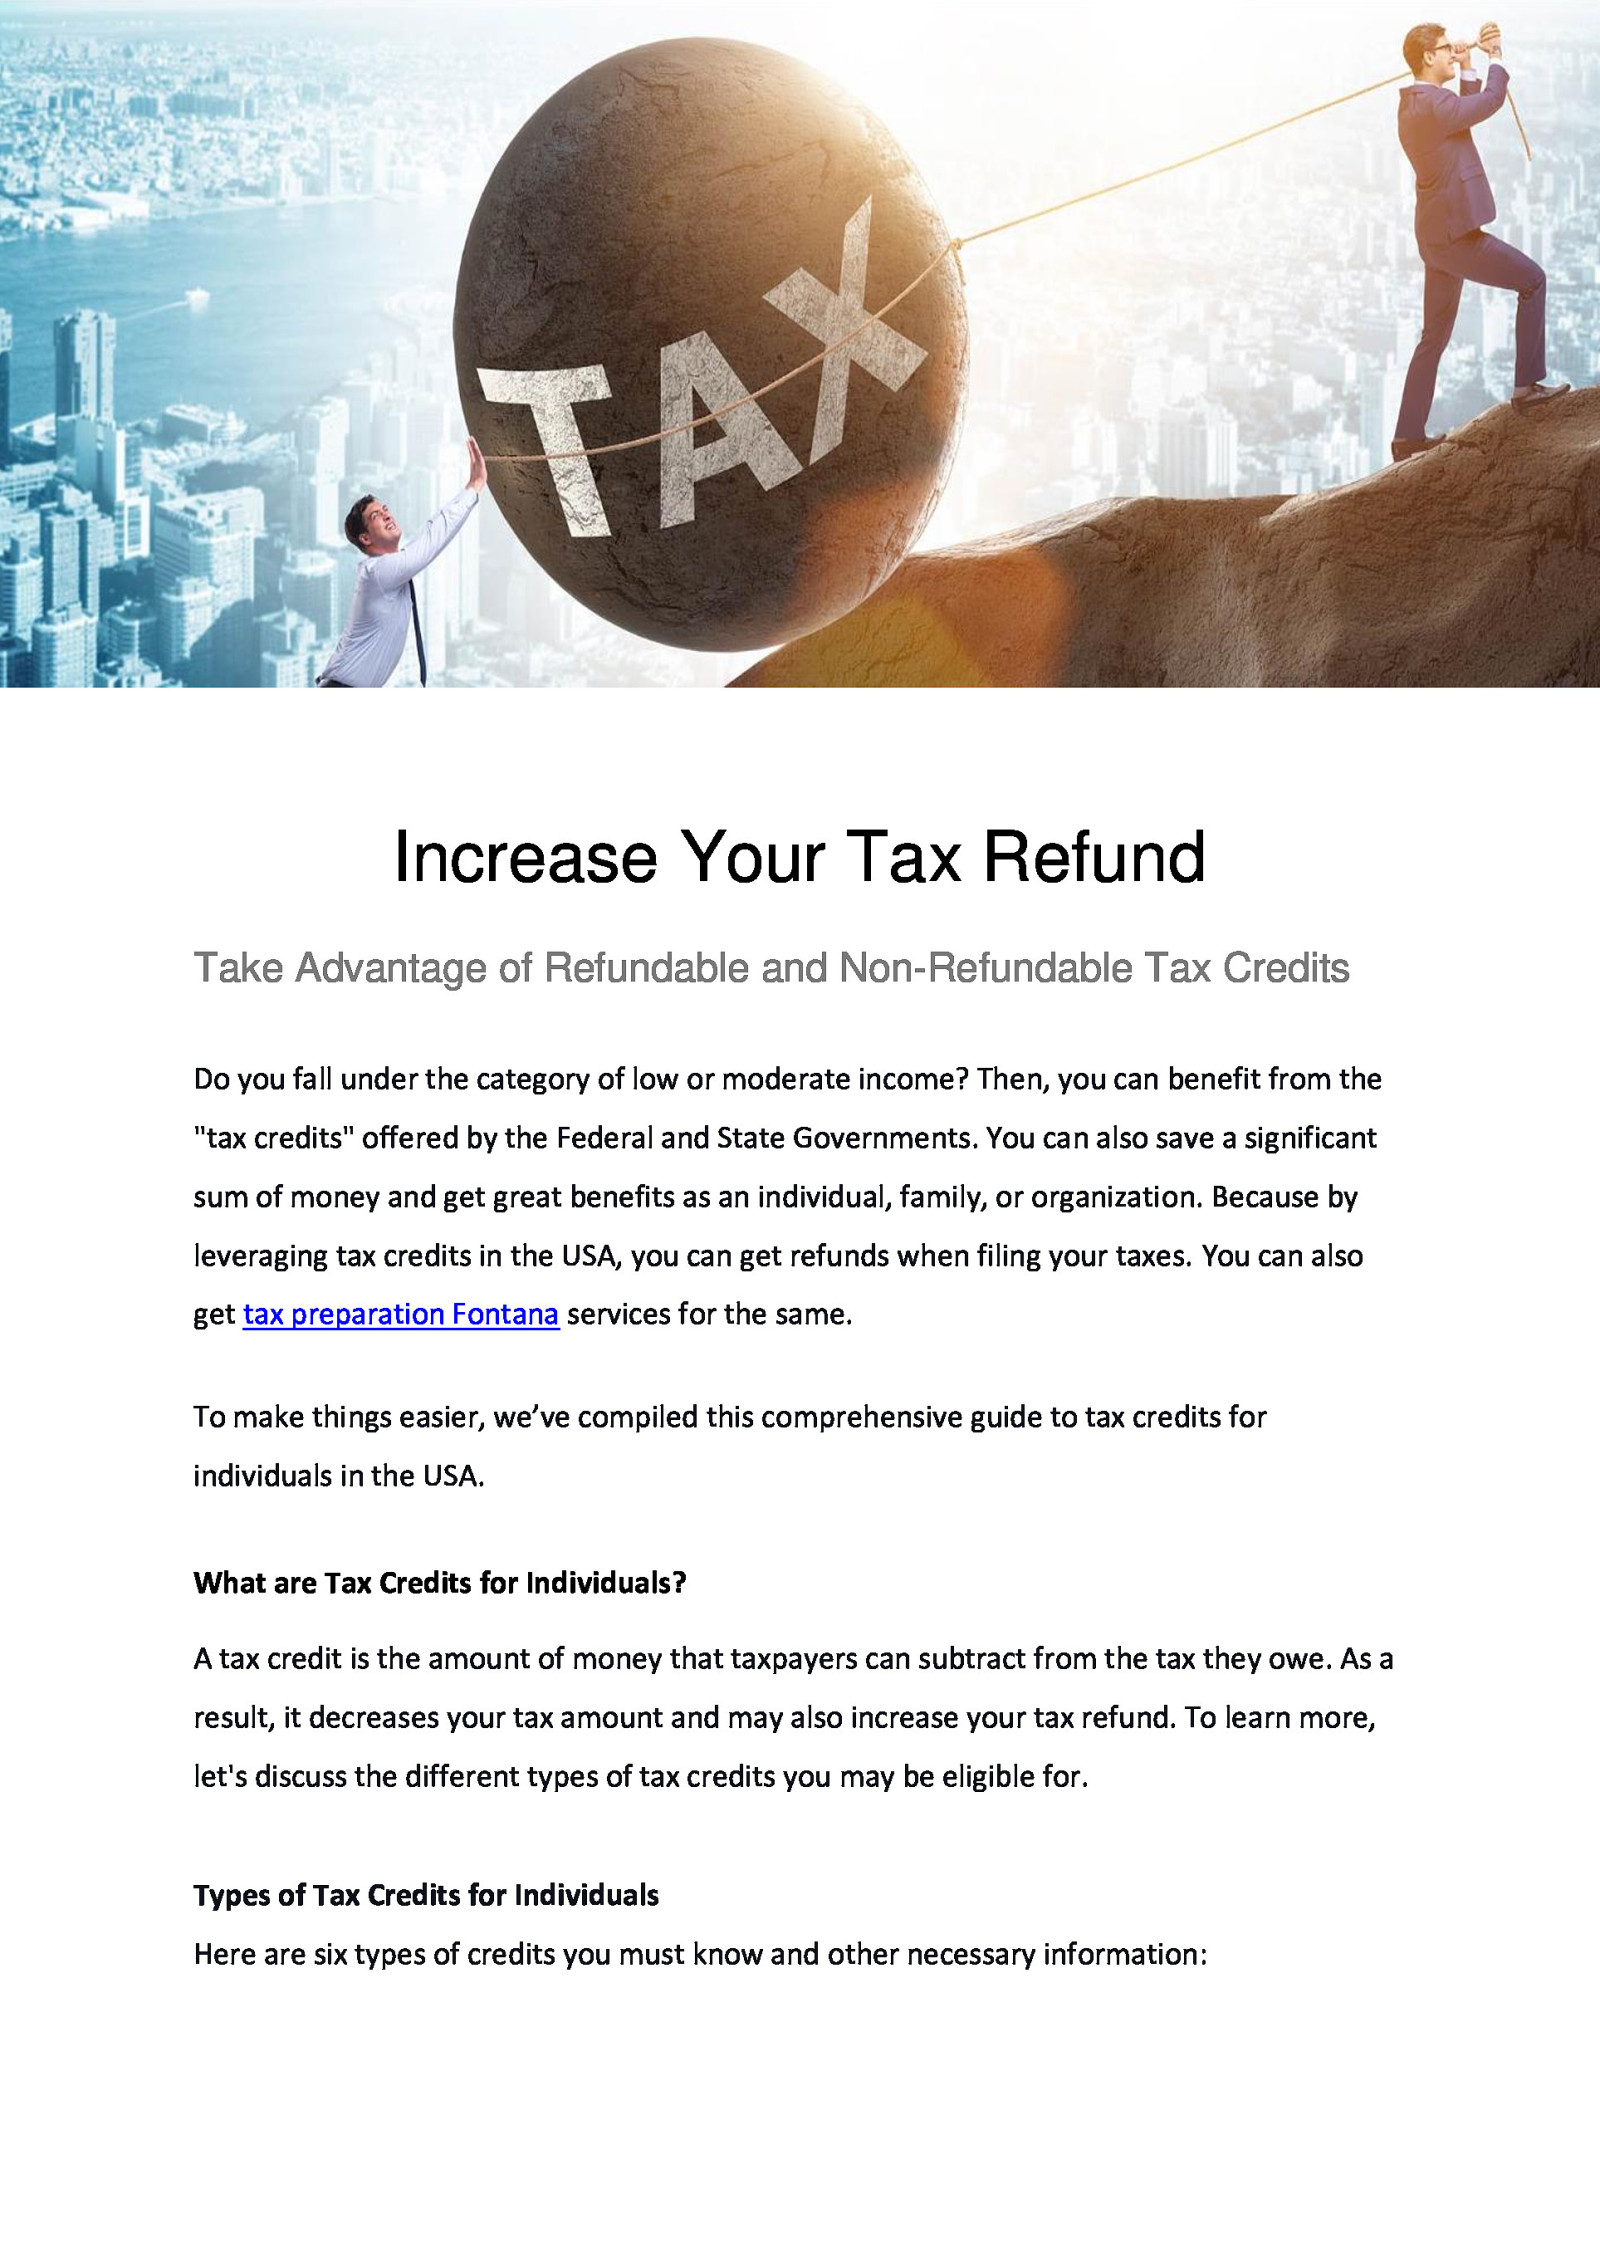 Increase Your Tax Refund